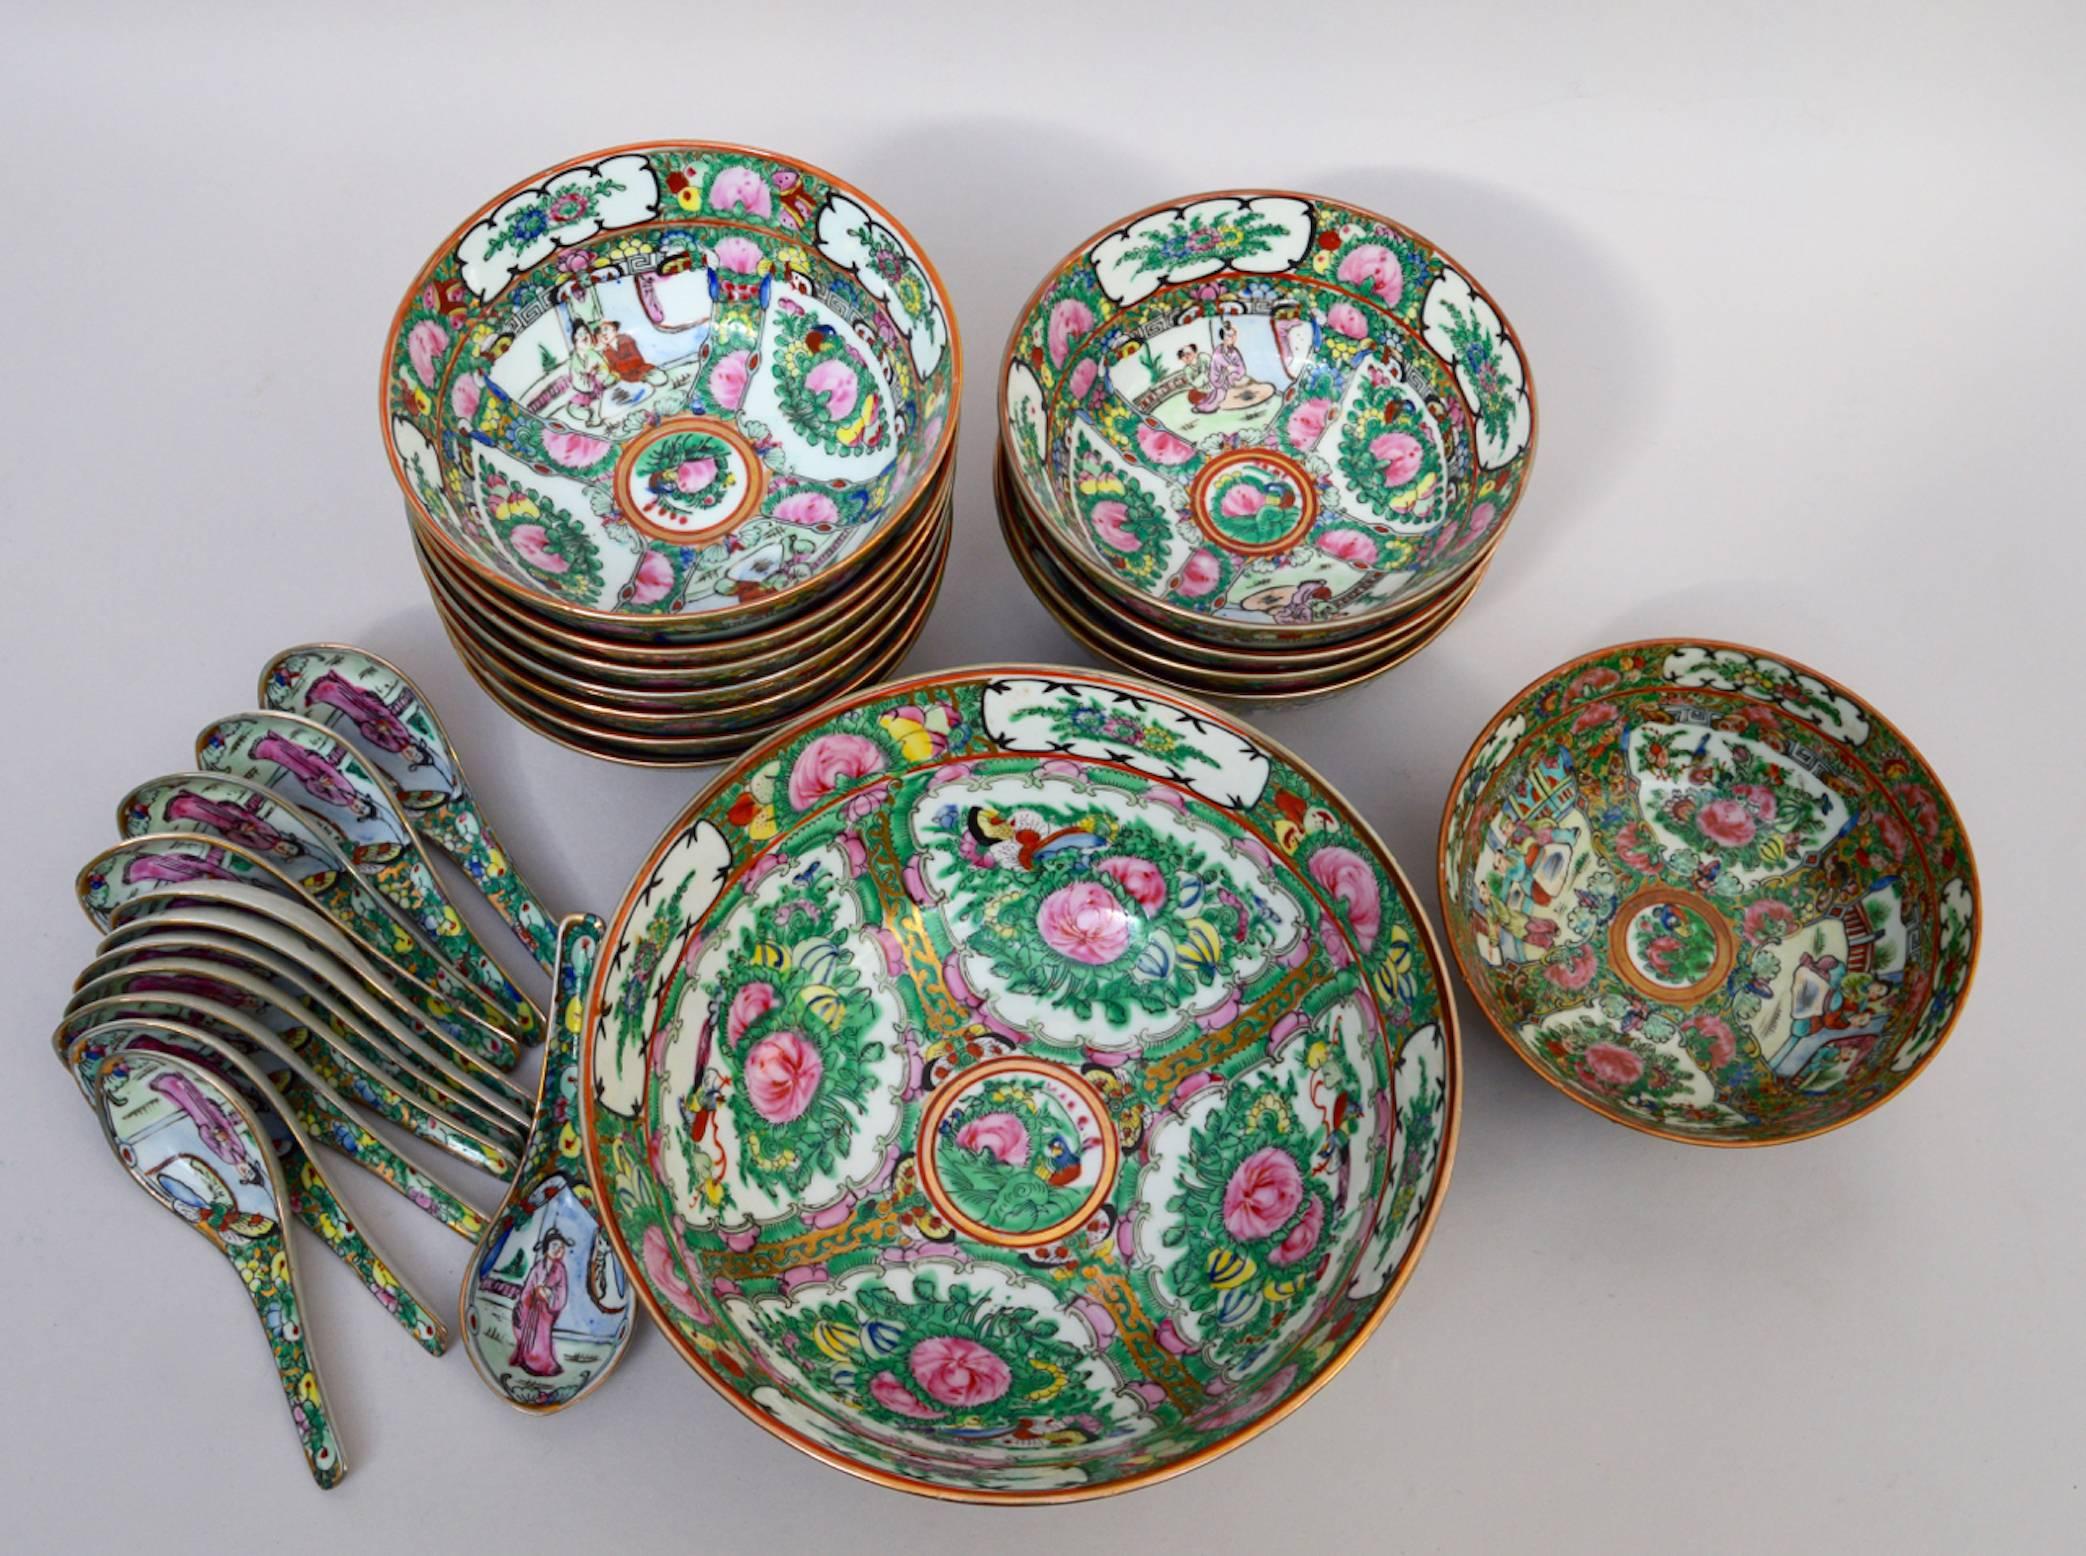 A 25-piece set of Chinese 